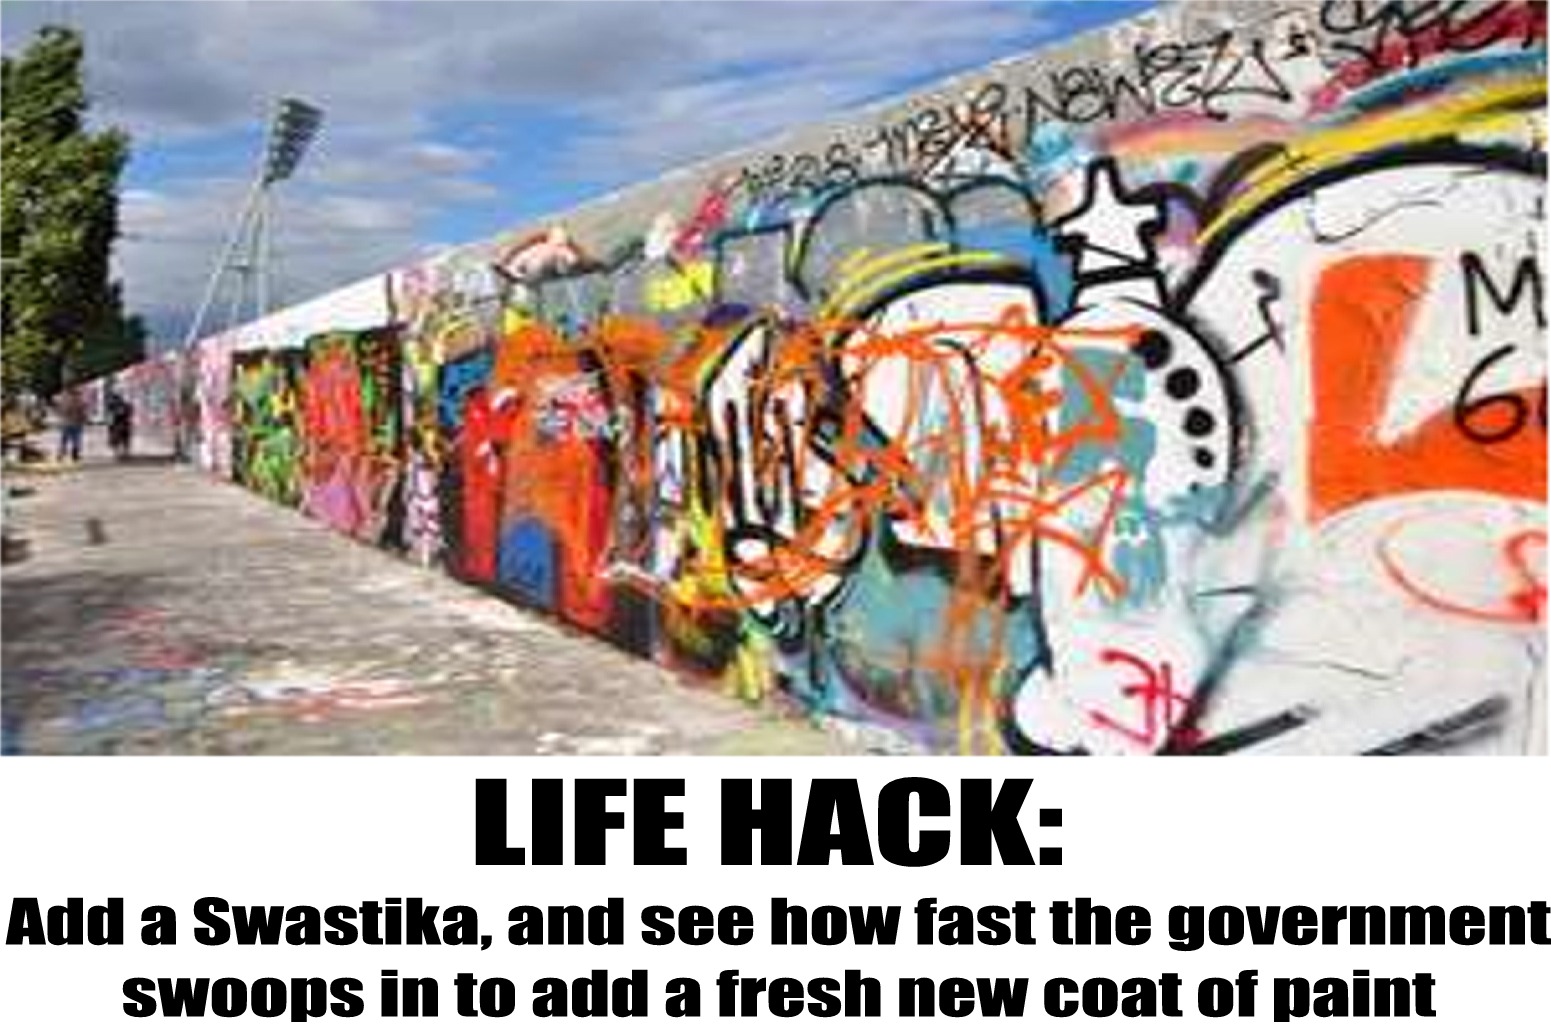 graffiti - Life Hack Add a Swastika, and see how fast the government Swoops in to add a fresh new coat of paint